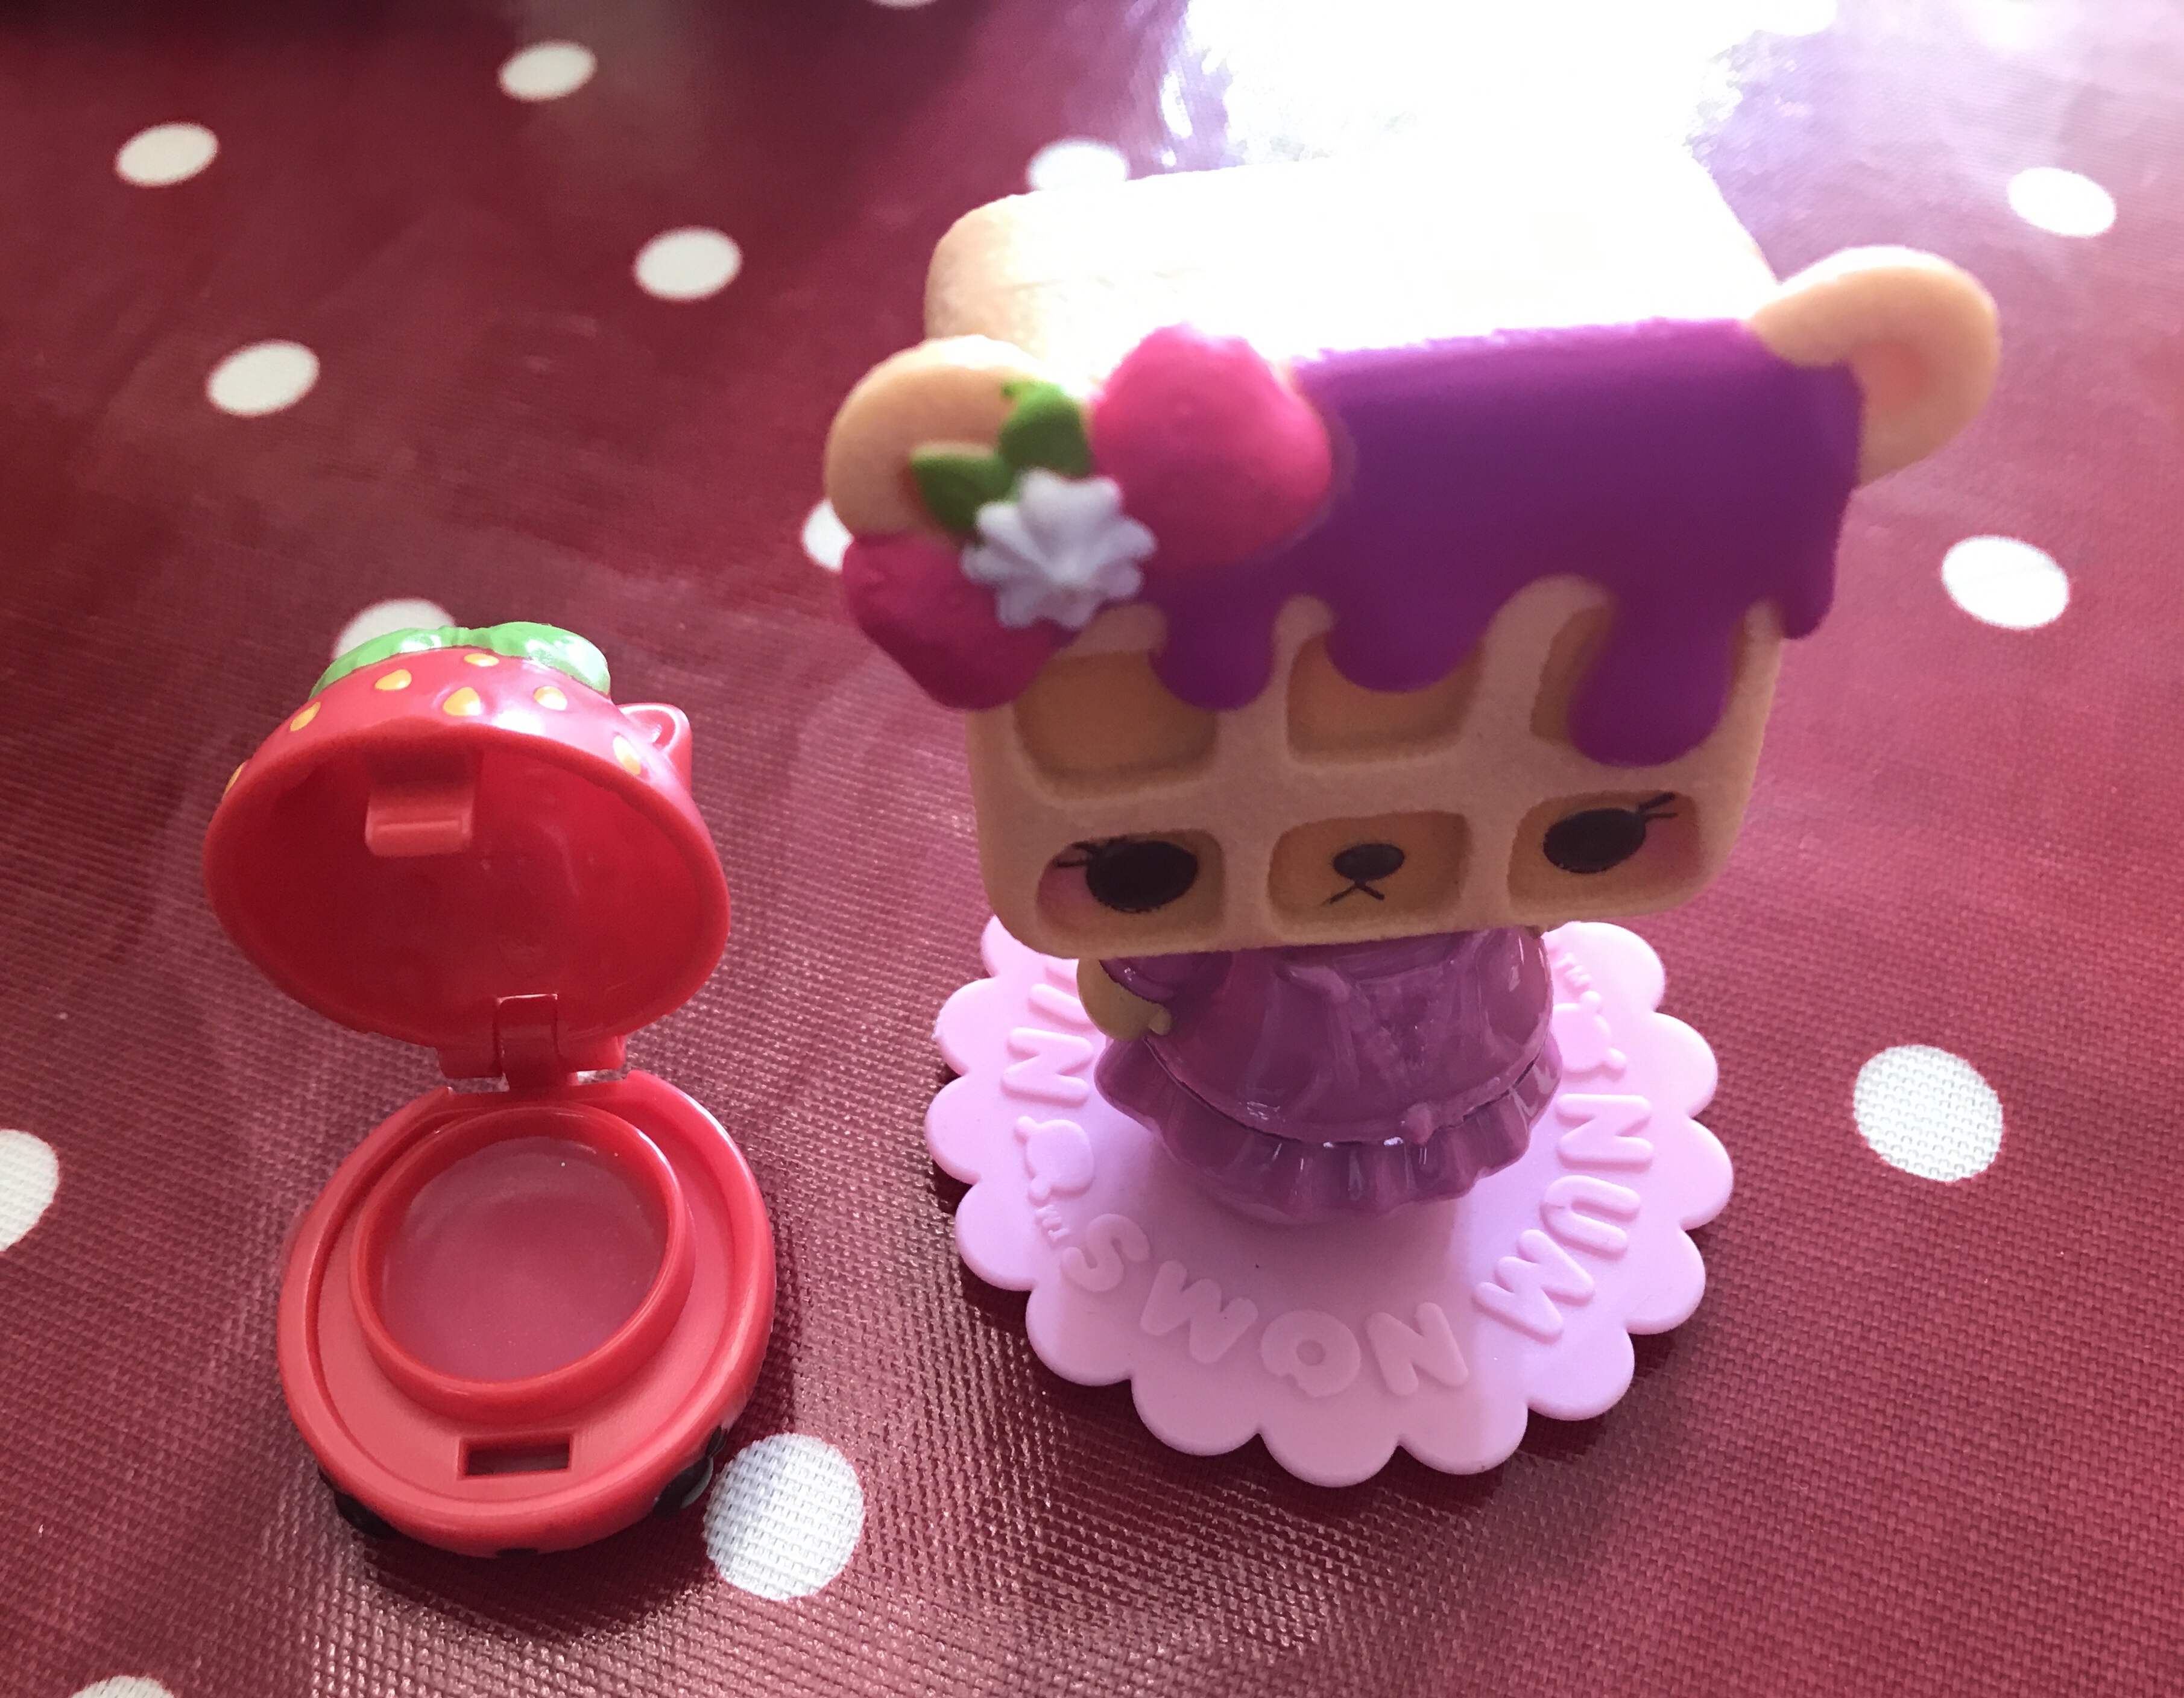 Celebrating Easter With Num Noms Latest Collectible Toys and Baking Easter Egg Bark